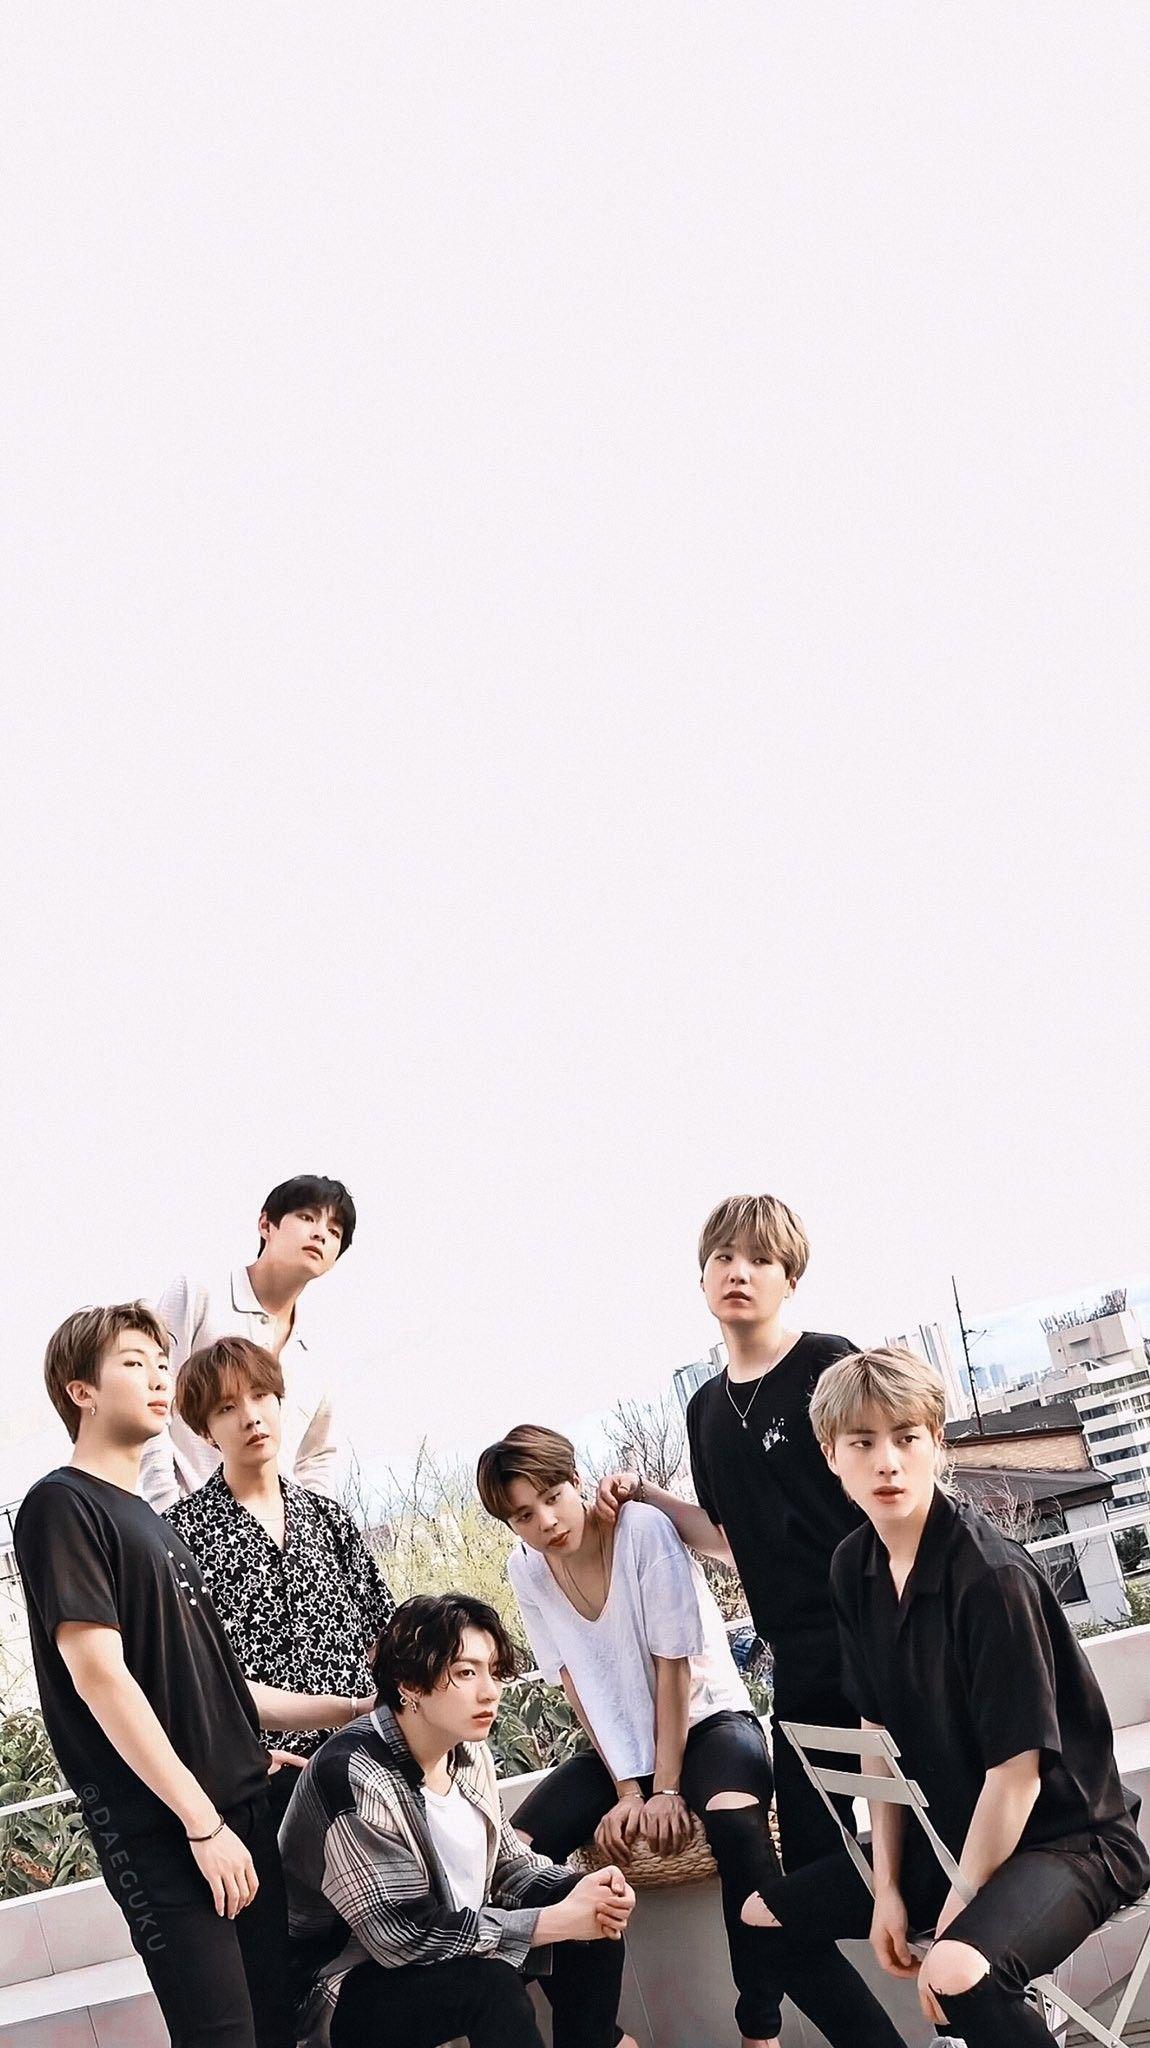 Bts 2022 Wallpapers  Top Free Bts 2022 Backgrounds  WallpaperAccess